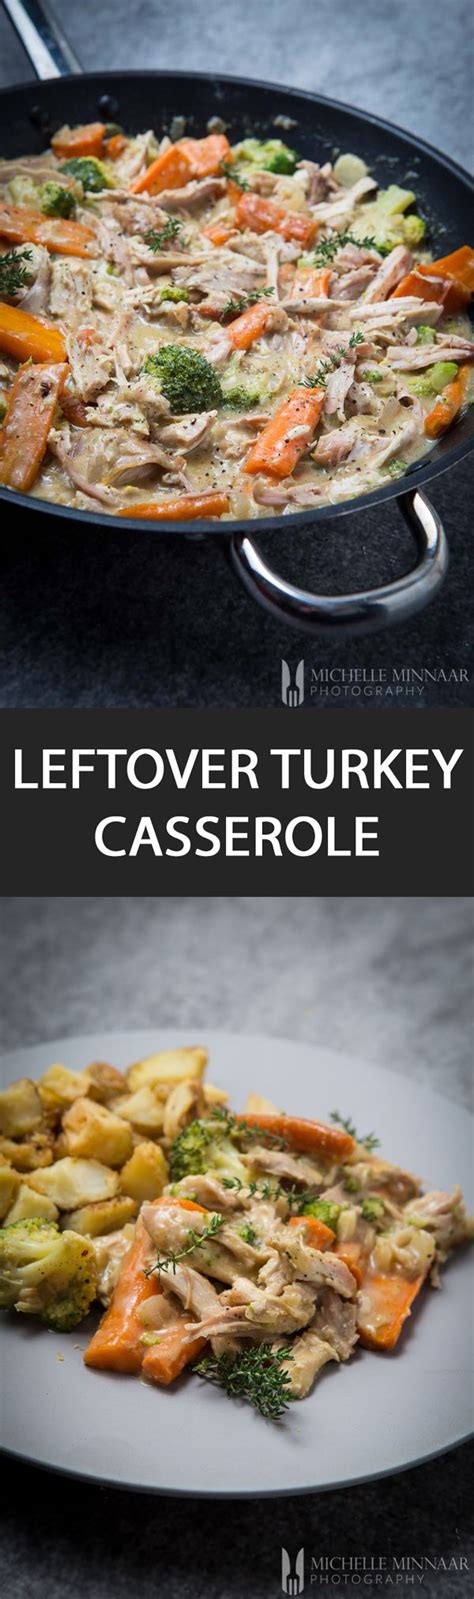 Leftover Turkey Casserole Make The Most Of Your Leftover Turkey This